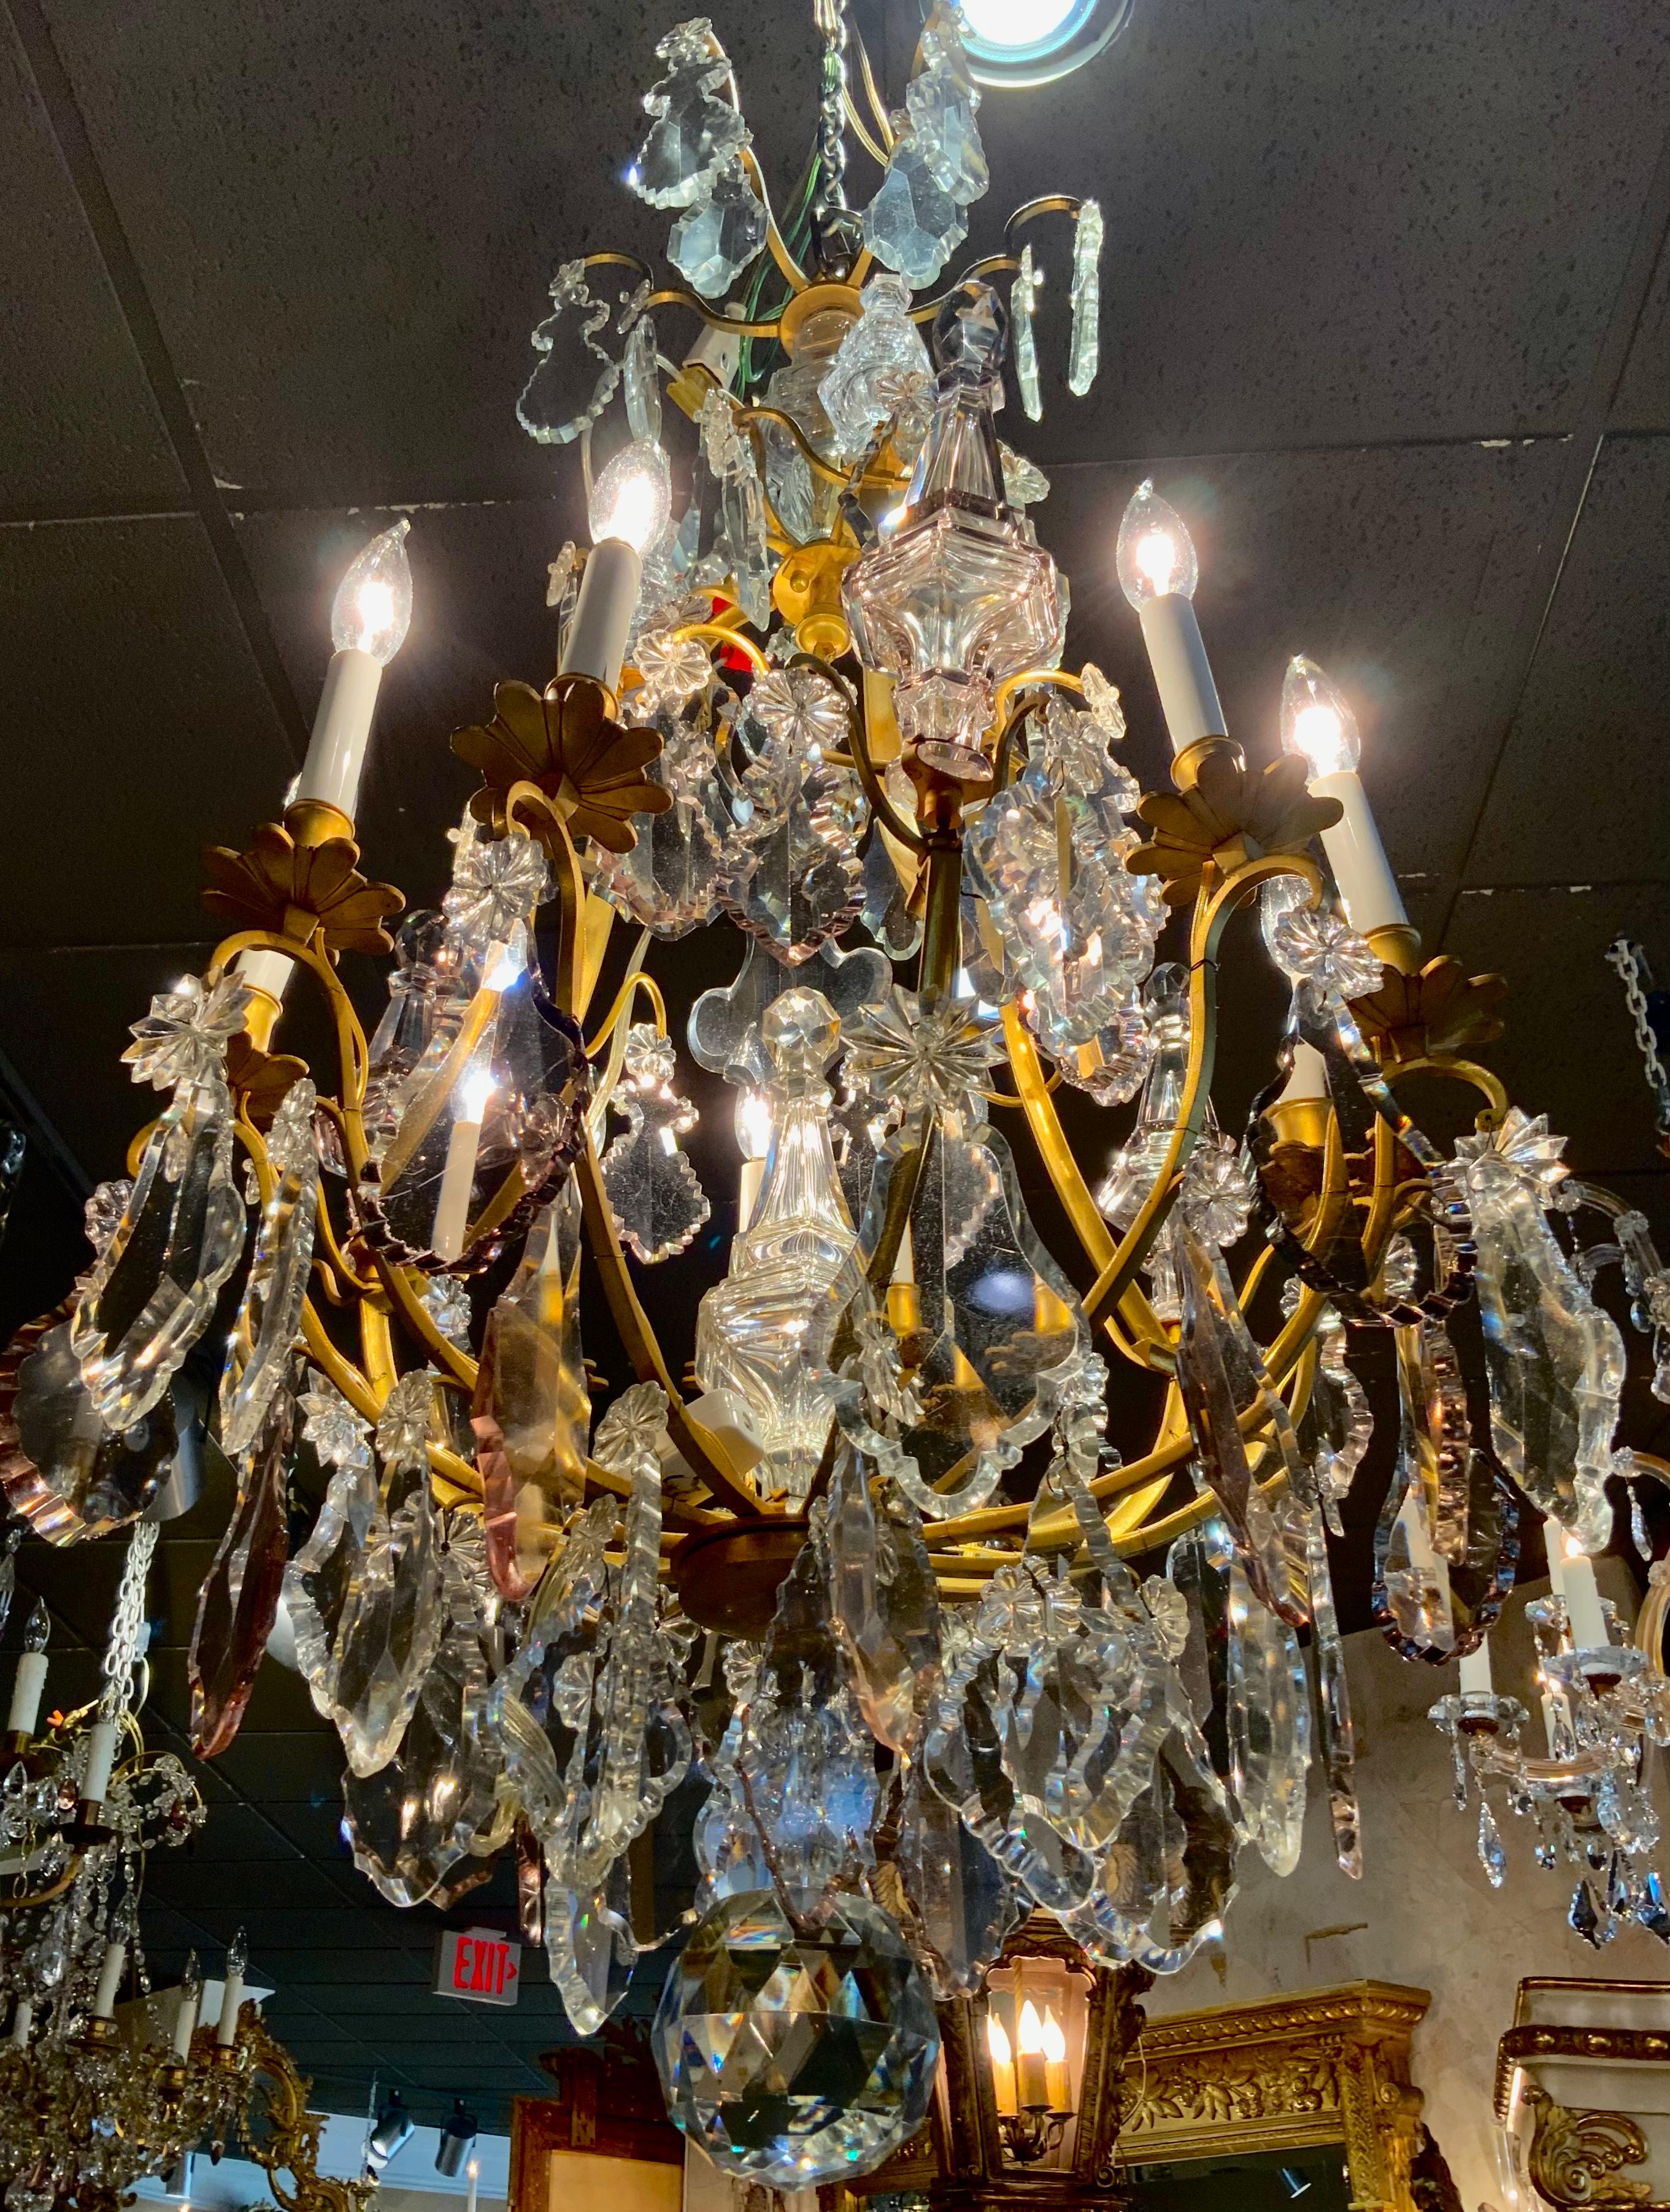 Exceptional French chandelier having nine lights on bronze dore cage.
Crystal that is very clear intermingled with pale lavender crystal
Three large spires around the circumference alternating with the
The lights add special design elements. A